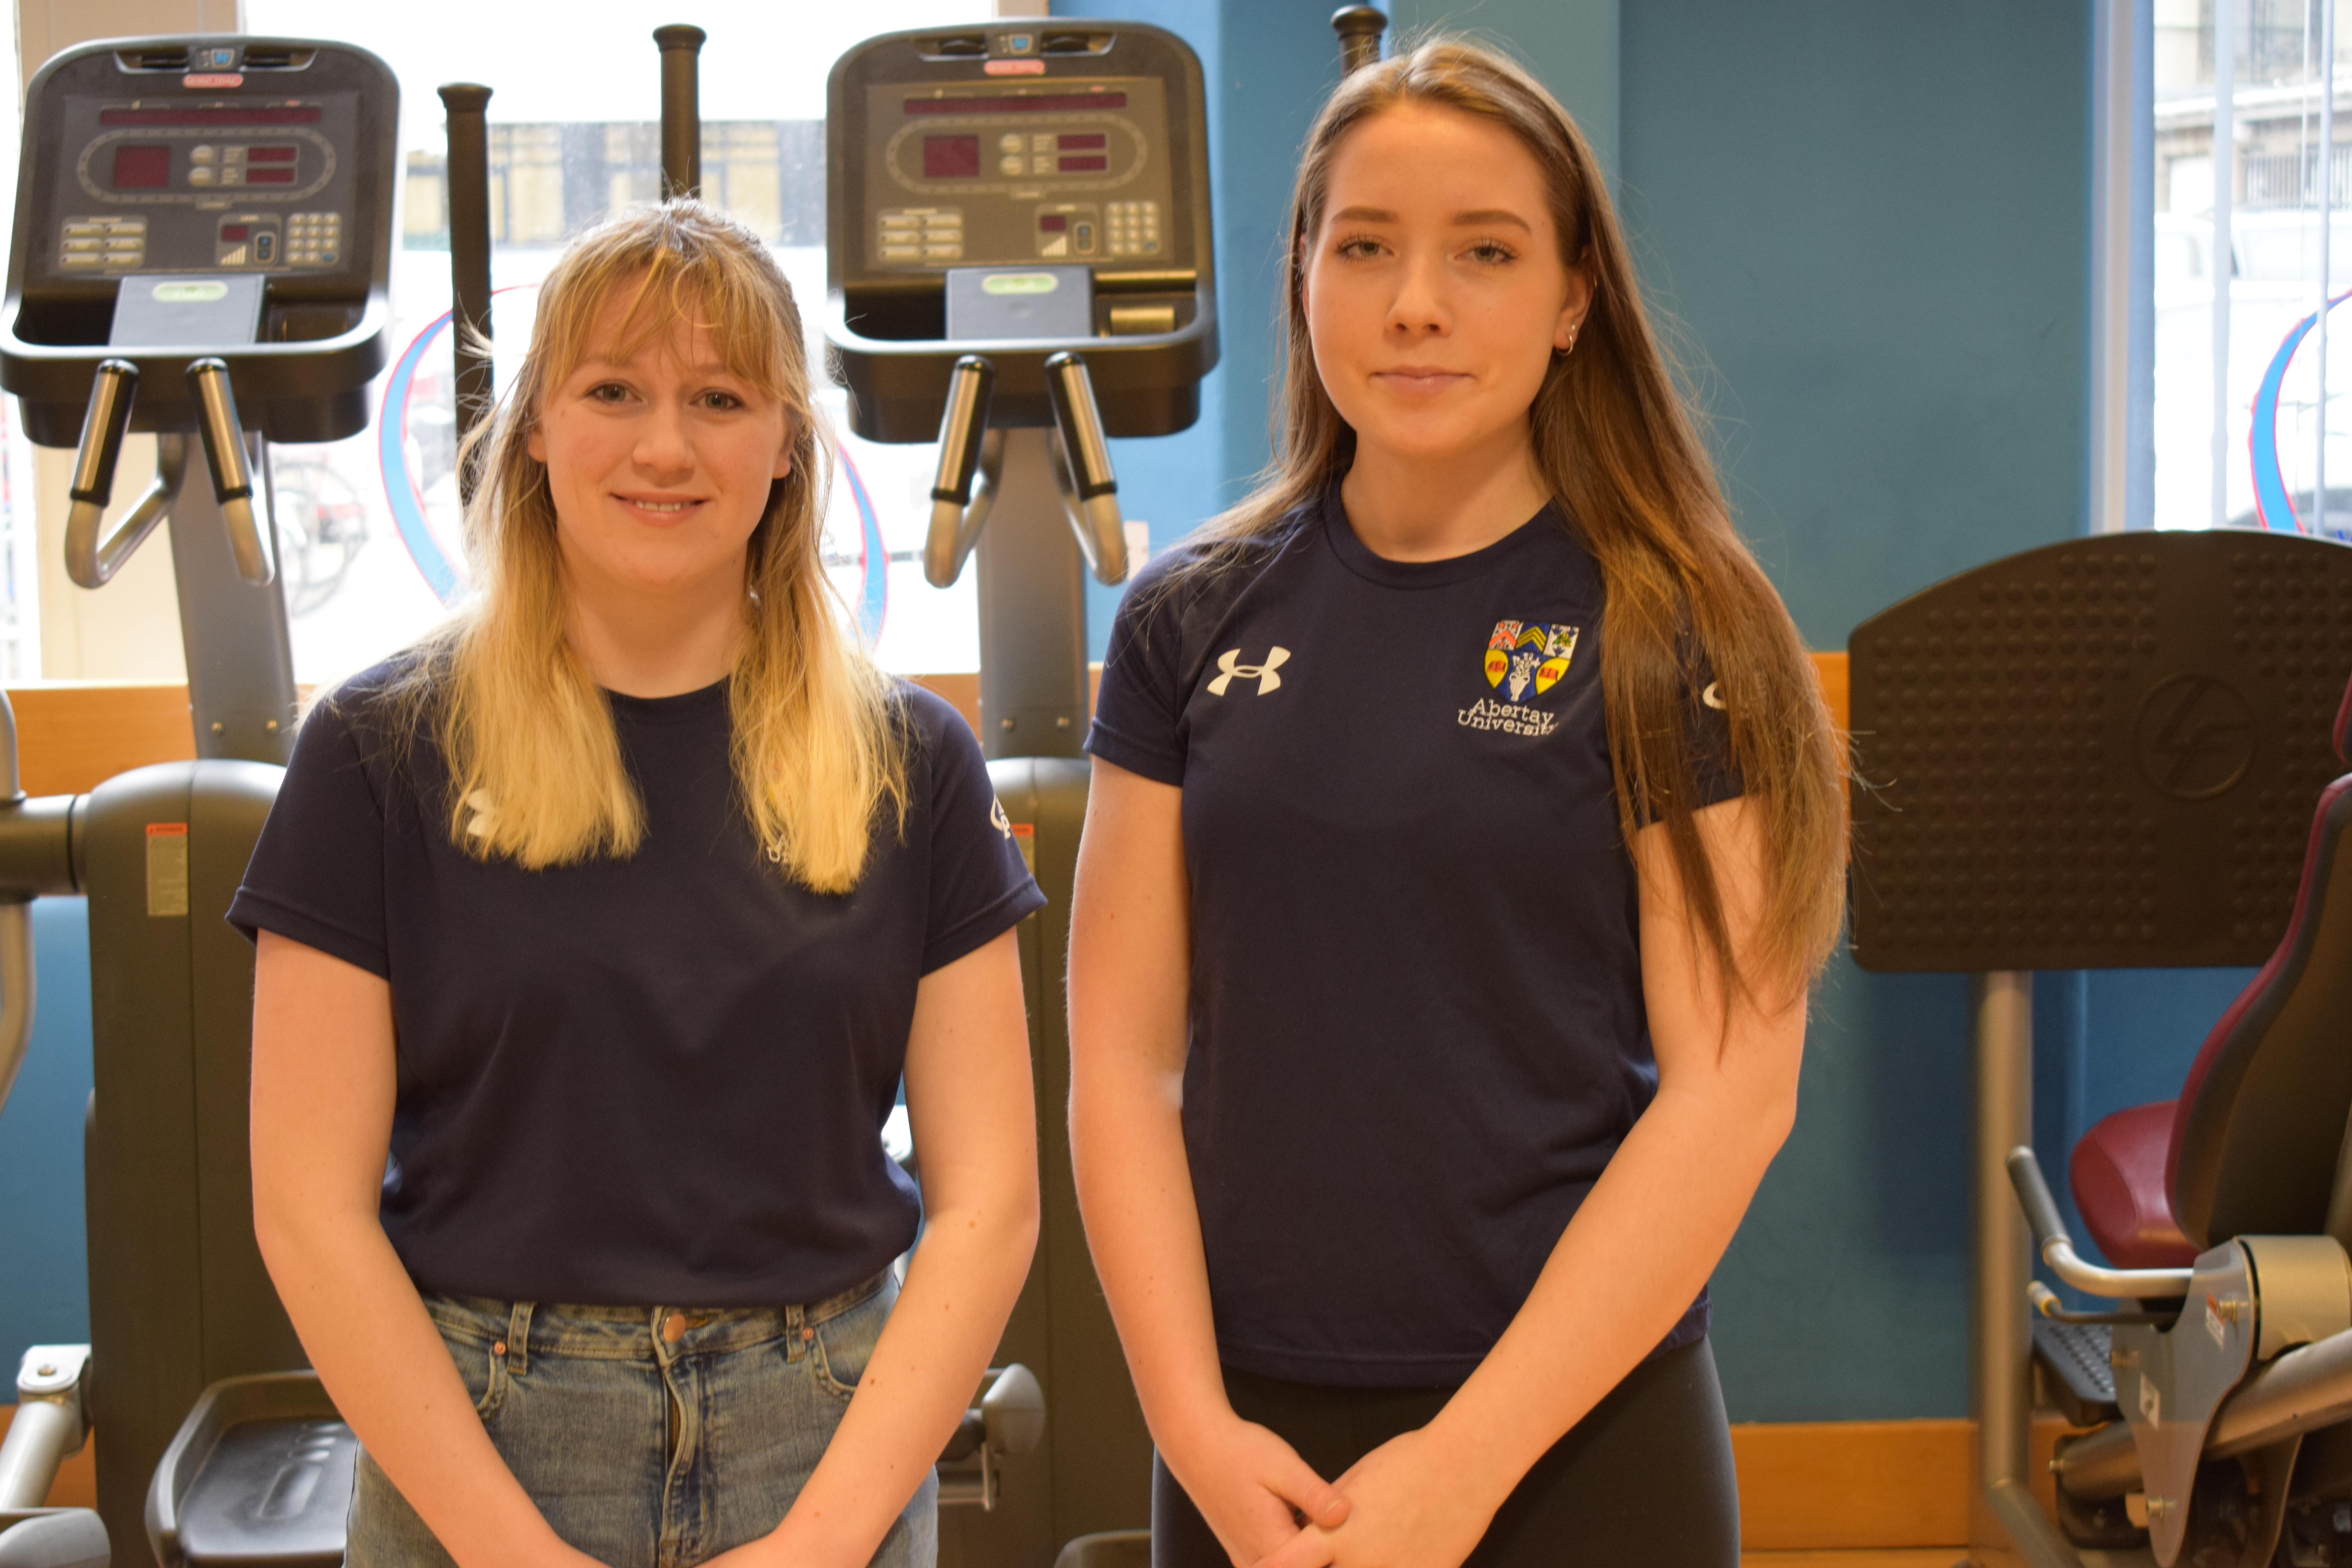 Jennifer (on the left) and Philippa (on the right) in Abertay’s gym